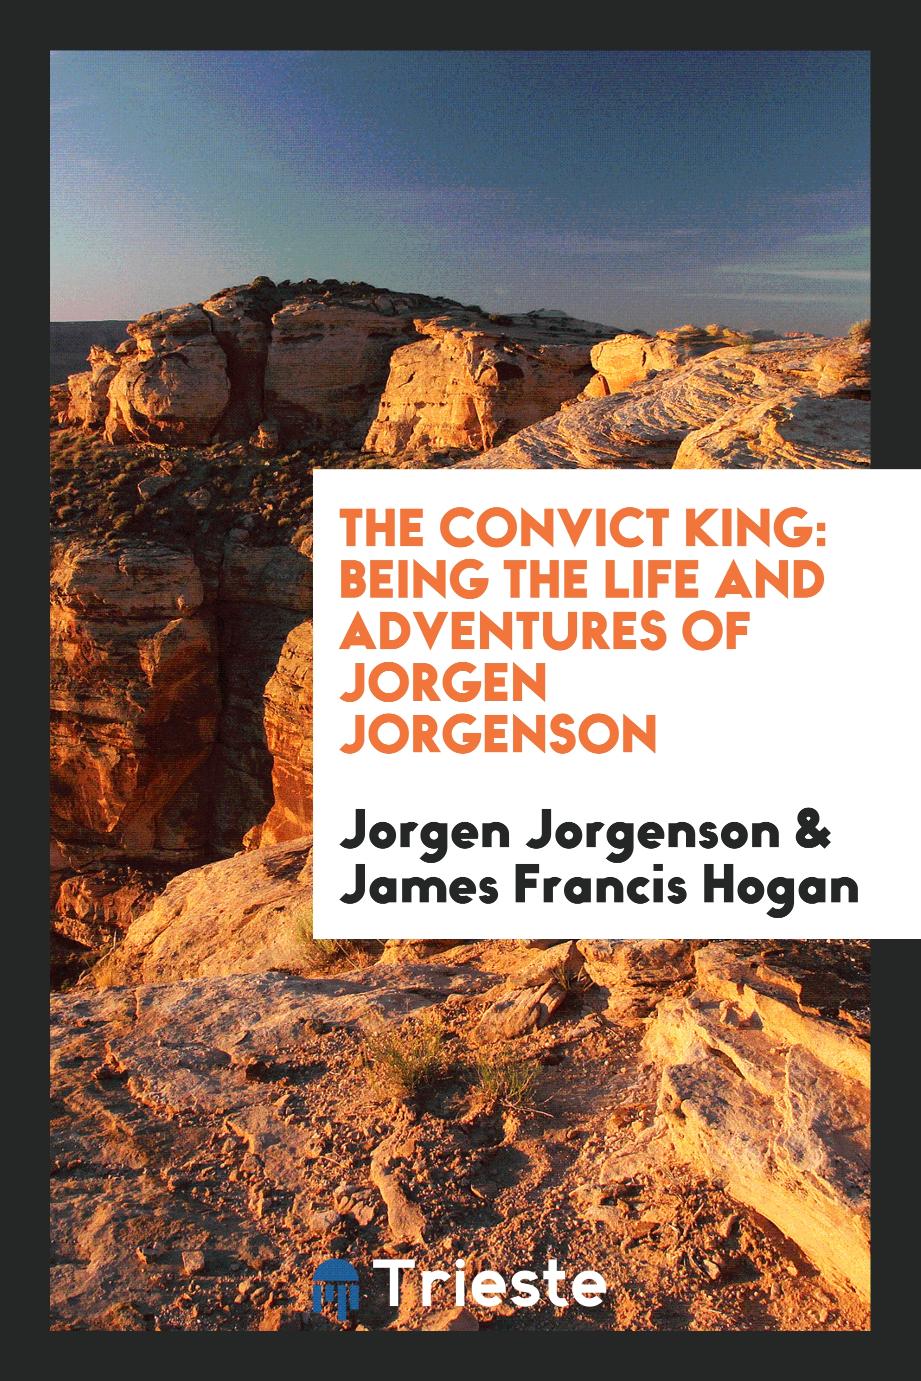 The Convict King: Being the Life and Adventures of Jorgen Jorgenson